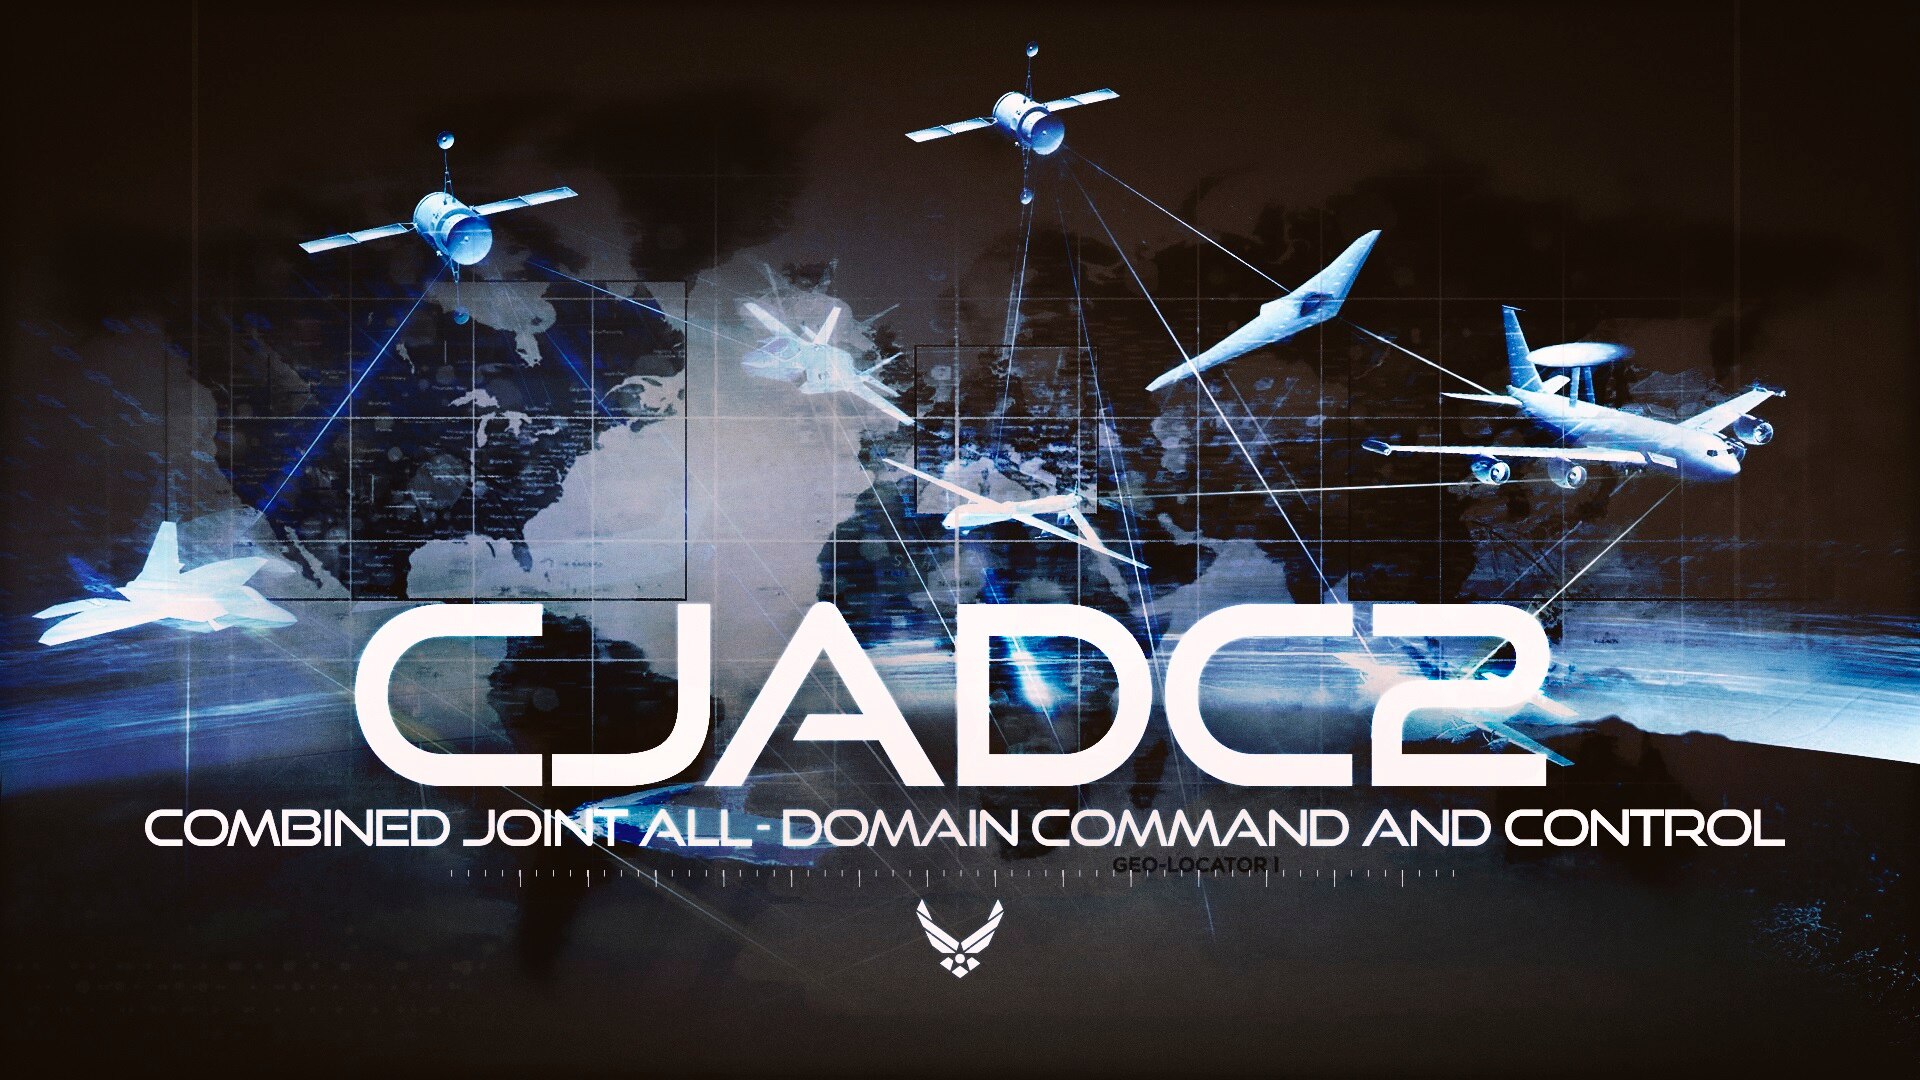 Combined, Joint All-Domain Command and Control initiative